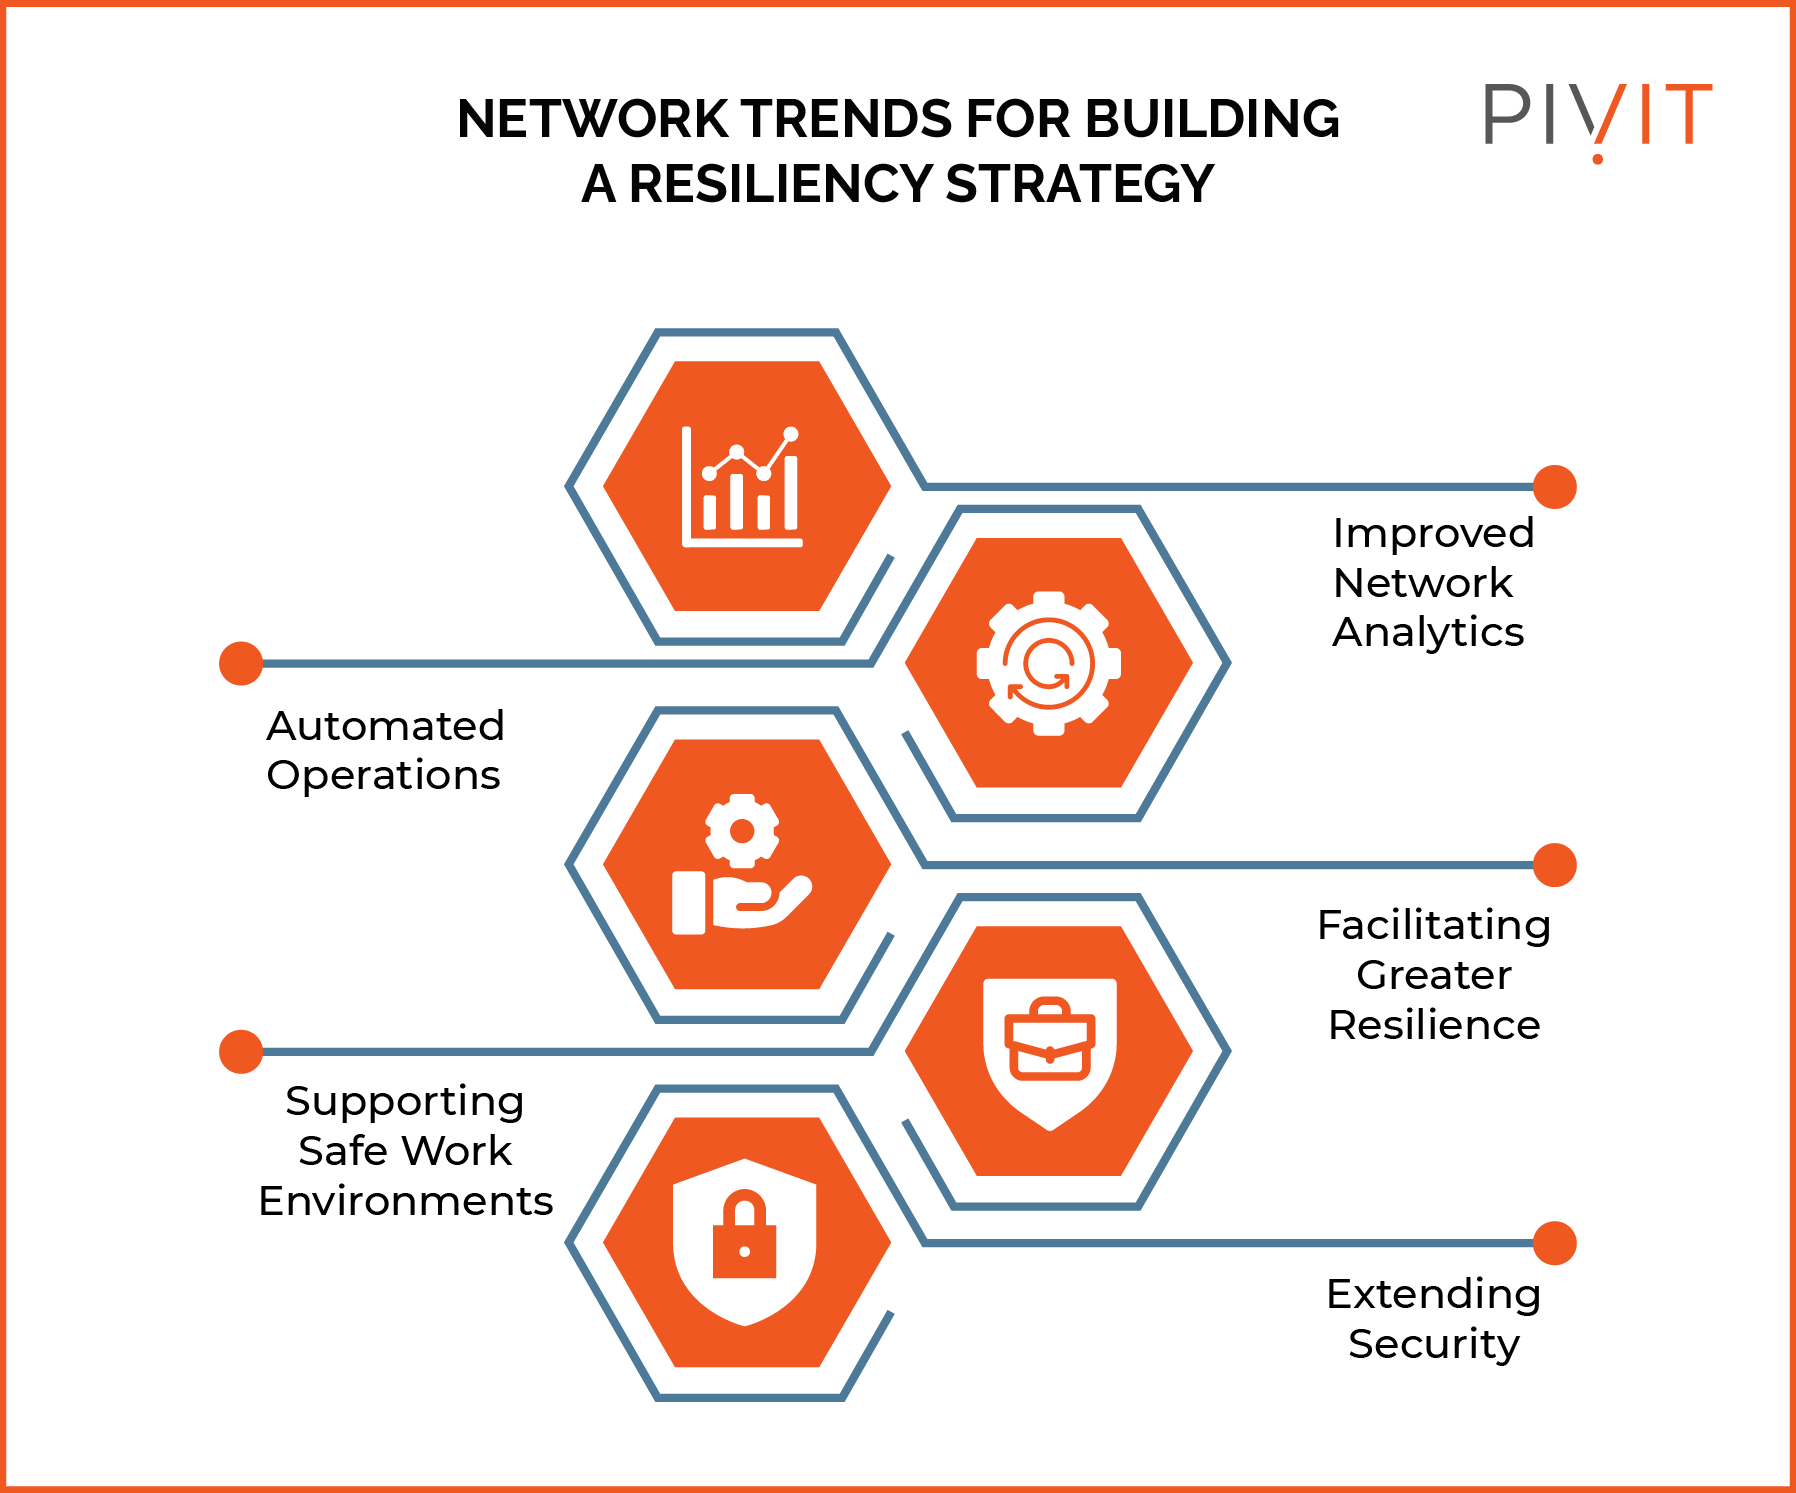 Network Trends for Building a Resiliency Strategy